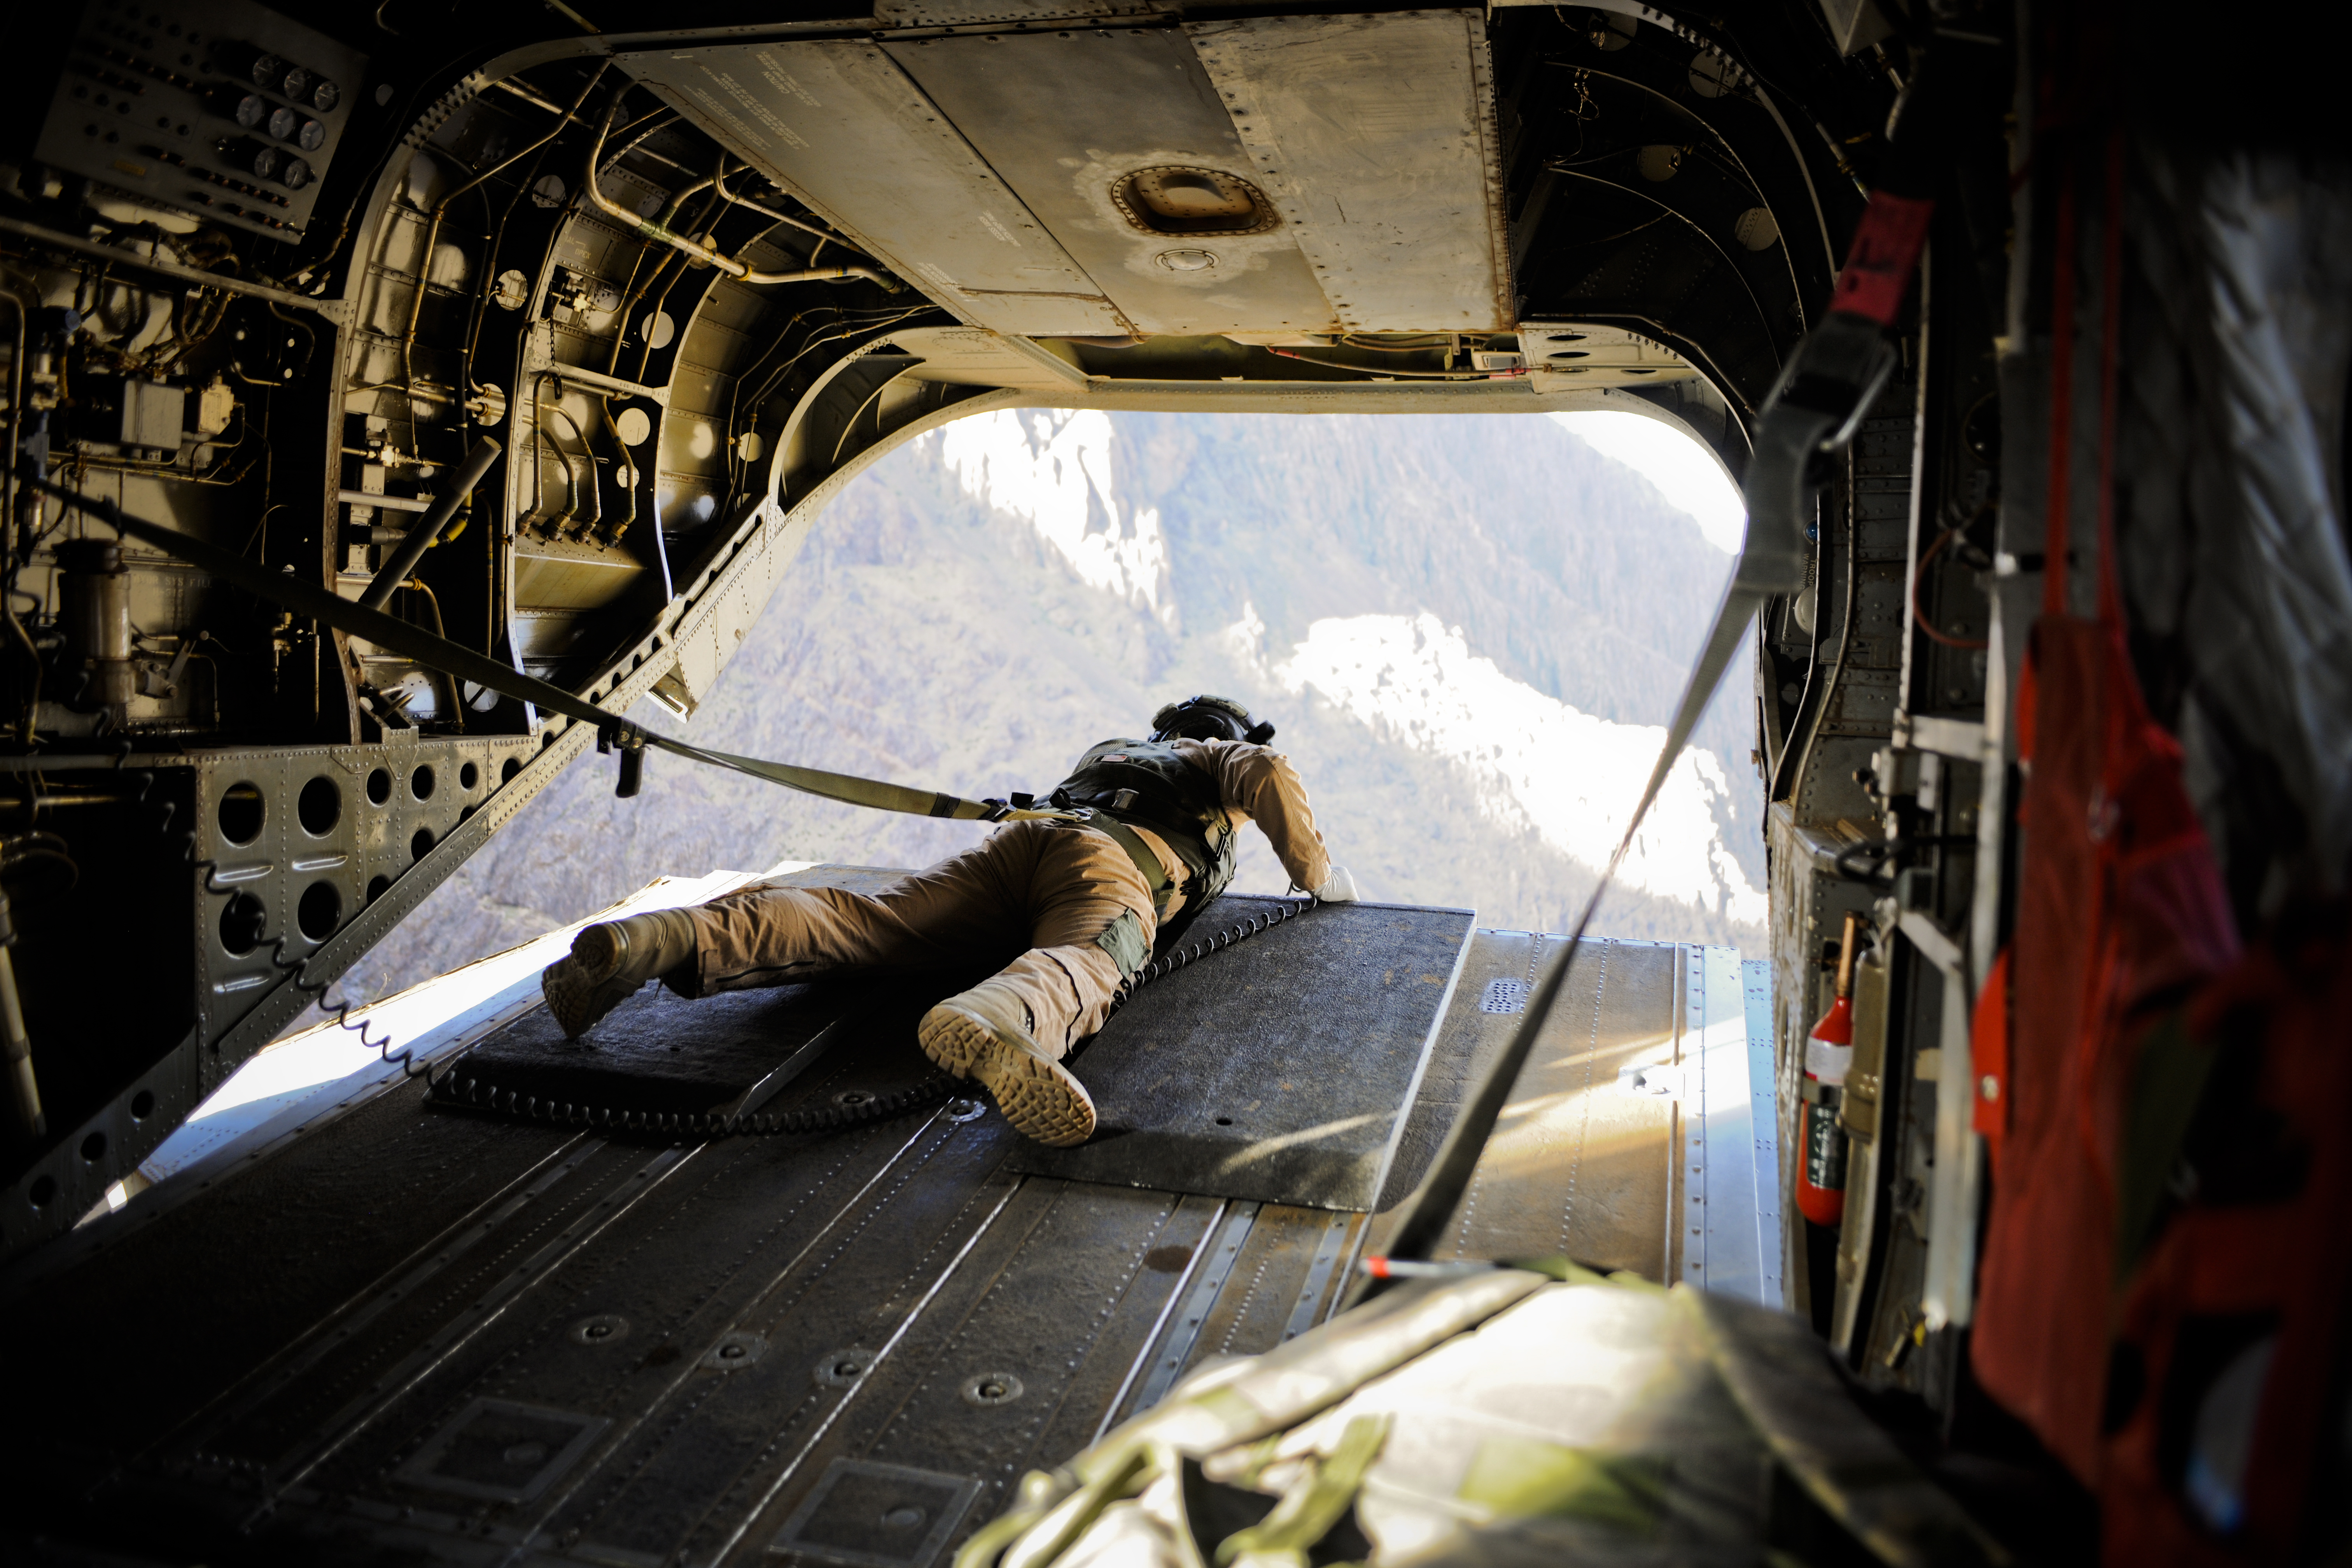 RAF Regiment Gunner in prone at the back of aircraft.